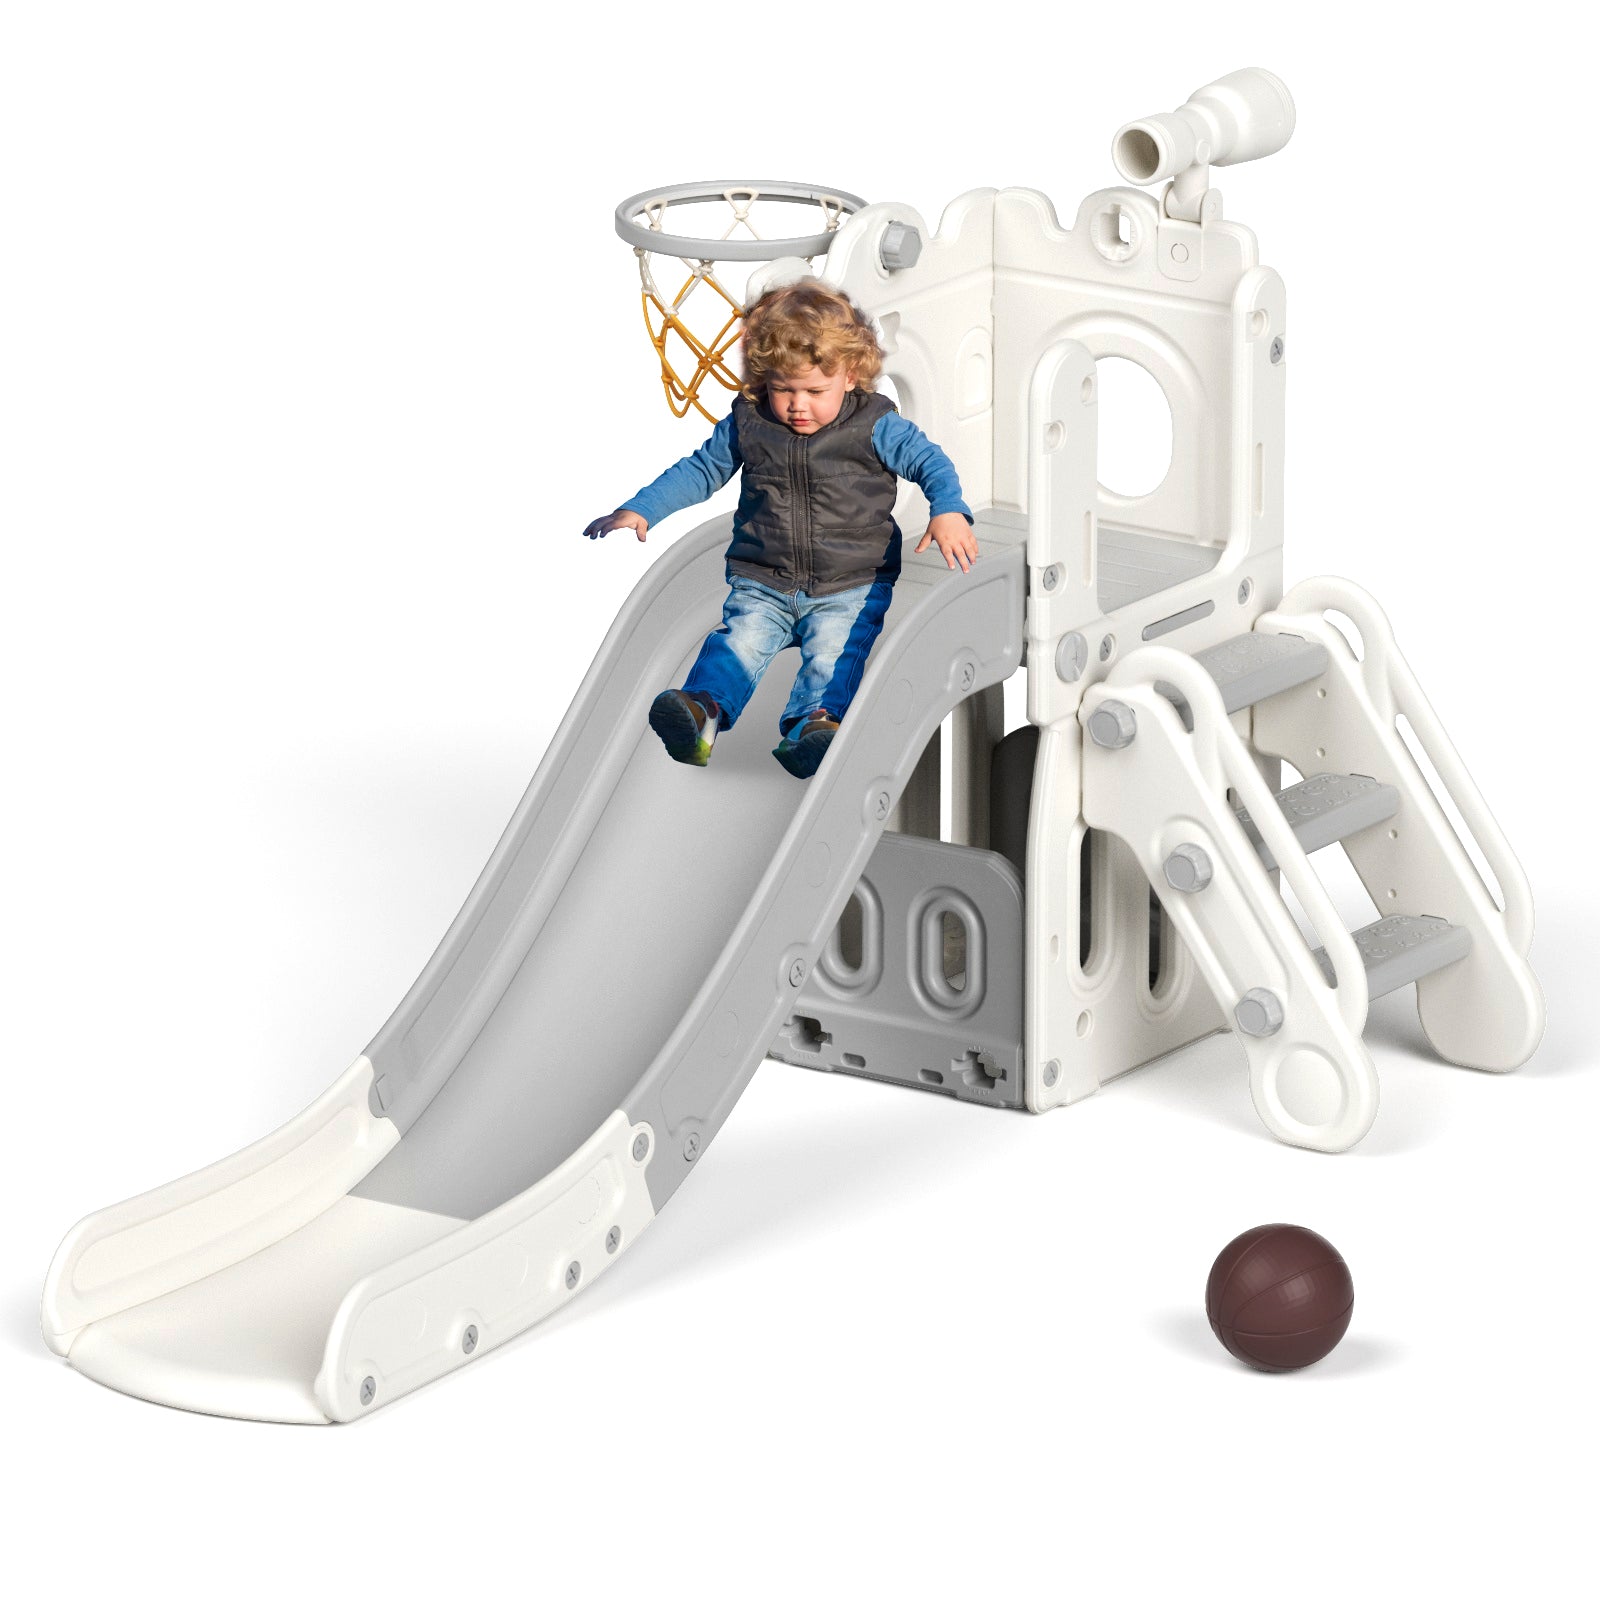 XJD 5-in-1 Toddler Slide Set in Gray Freestanding Climber Playset for Ages 1-3, Outdoor/Indoor Playset with Basketball Hoop and Ball